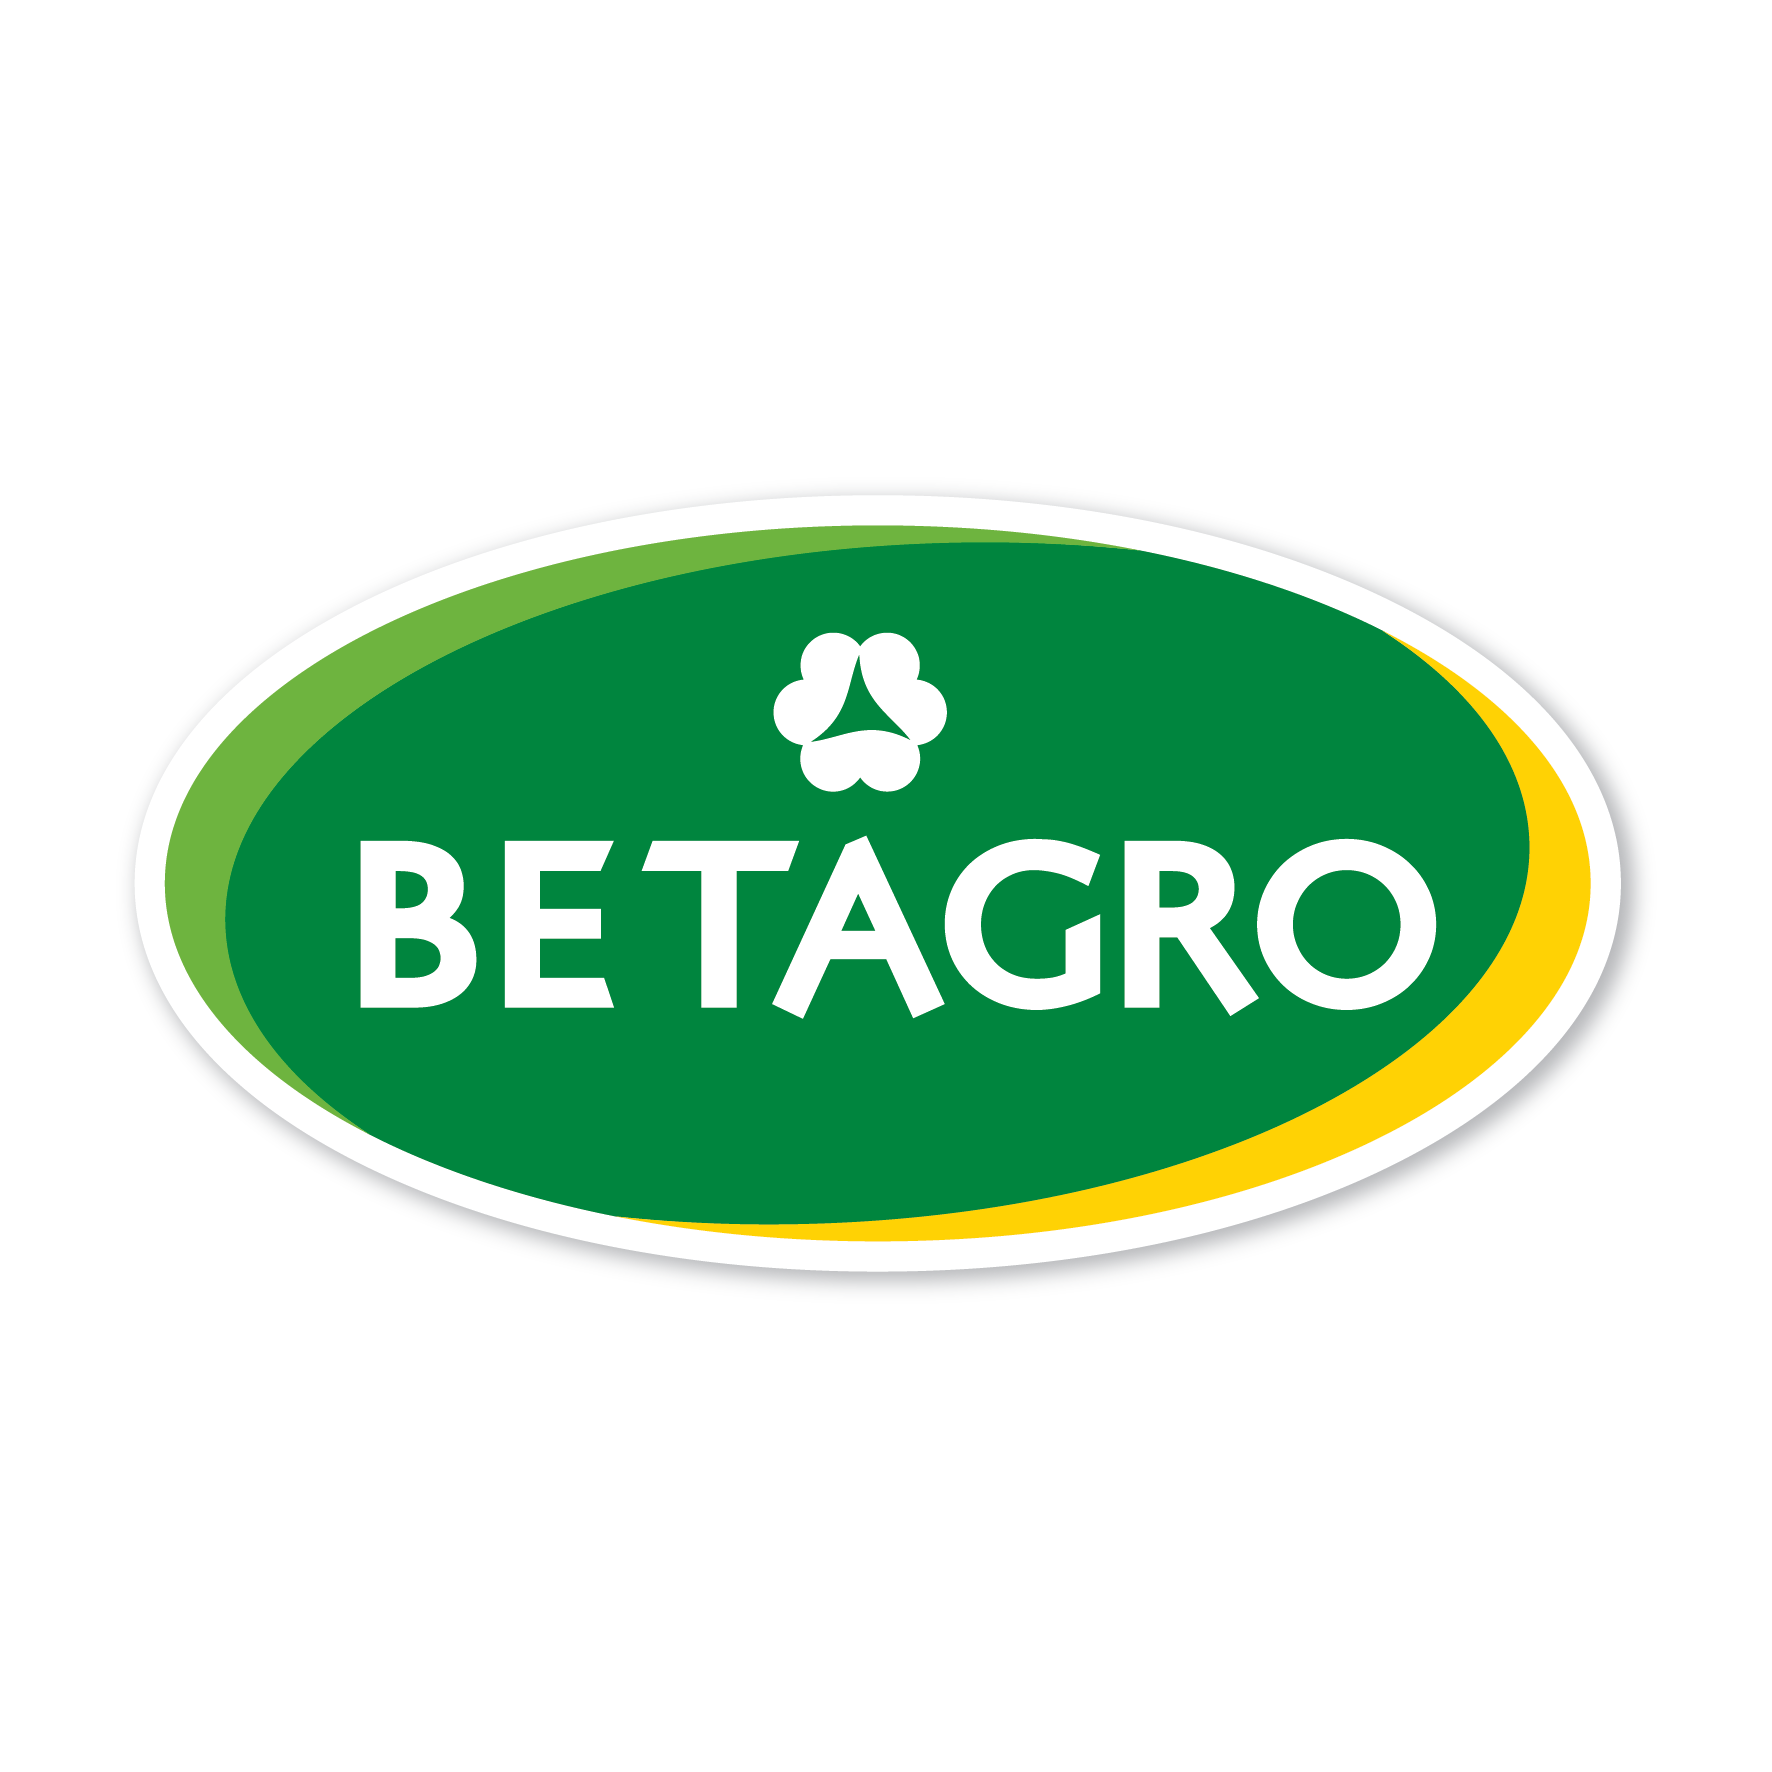 Betagro believes that people must have choice and access to better quality, safe food at a fair price, and delved into providing a wide range of cooked chicken products with no added hormones or growth promoters. Today, Betagro Group is a leading figure in the fully integrated agro-industrial and food business sector and widely recognised for their quality and safety standards. With an integrated quality management system instituted 24/7, every stage of food production across the entire supply chain is fully compliant with relevant quality and safety standards.